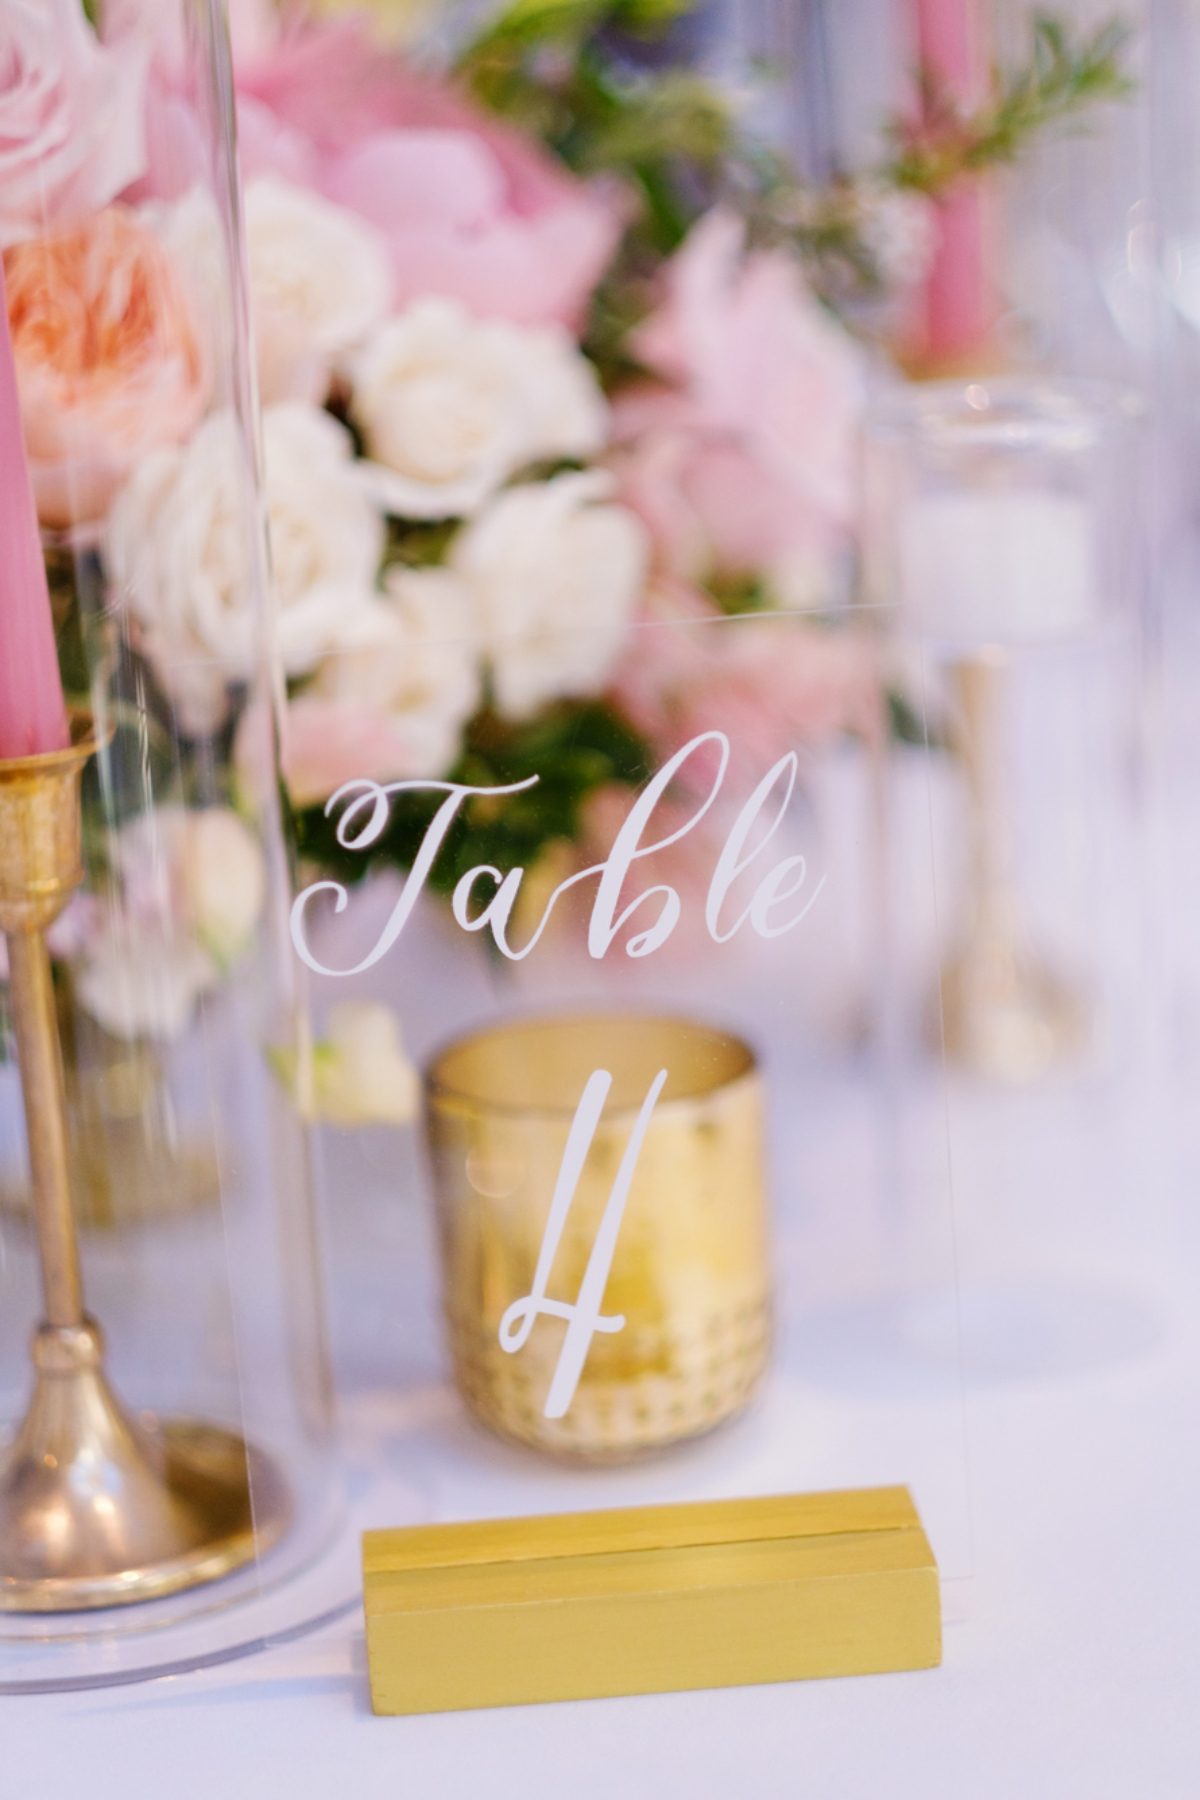 acrylic table numbers as part of spring wedding decor